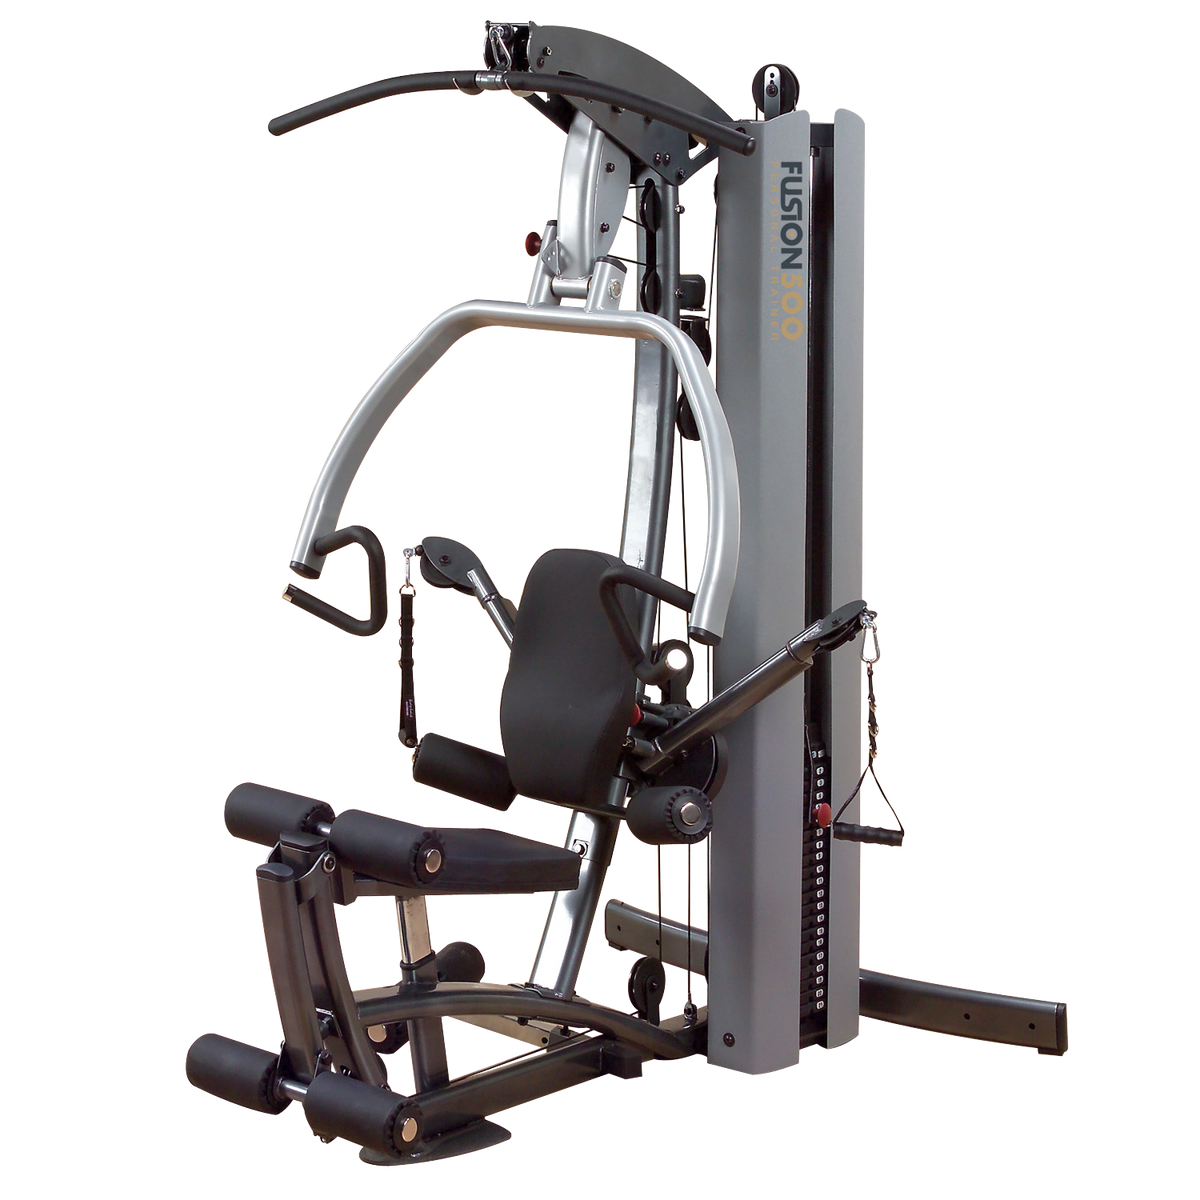 Body Solid FUSION 500 with 210lb Stack - F500/2